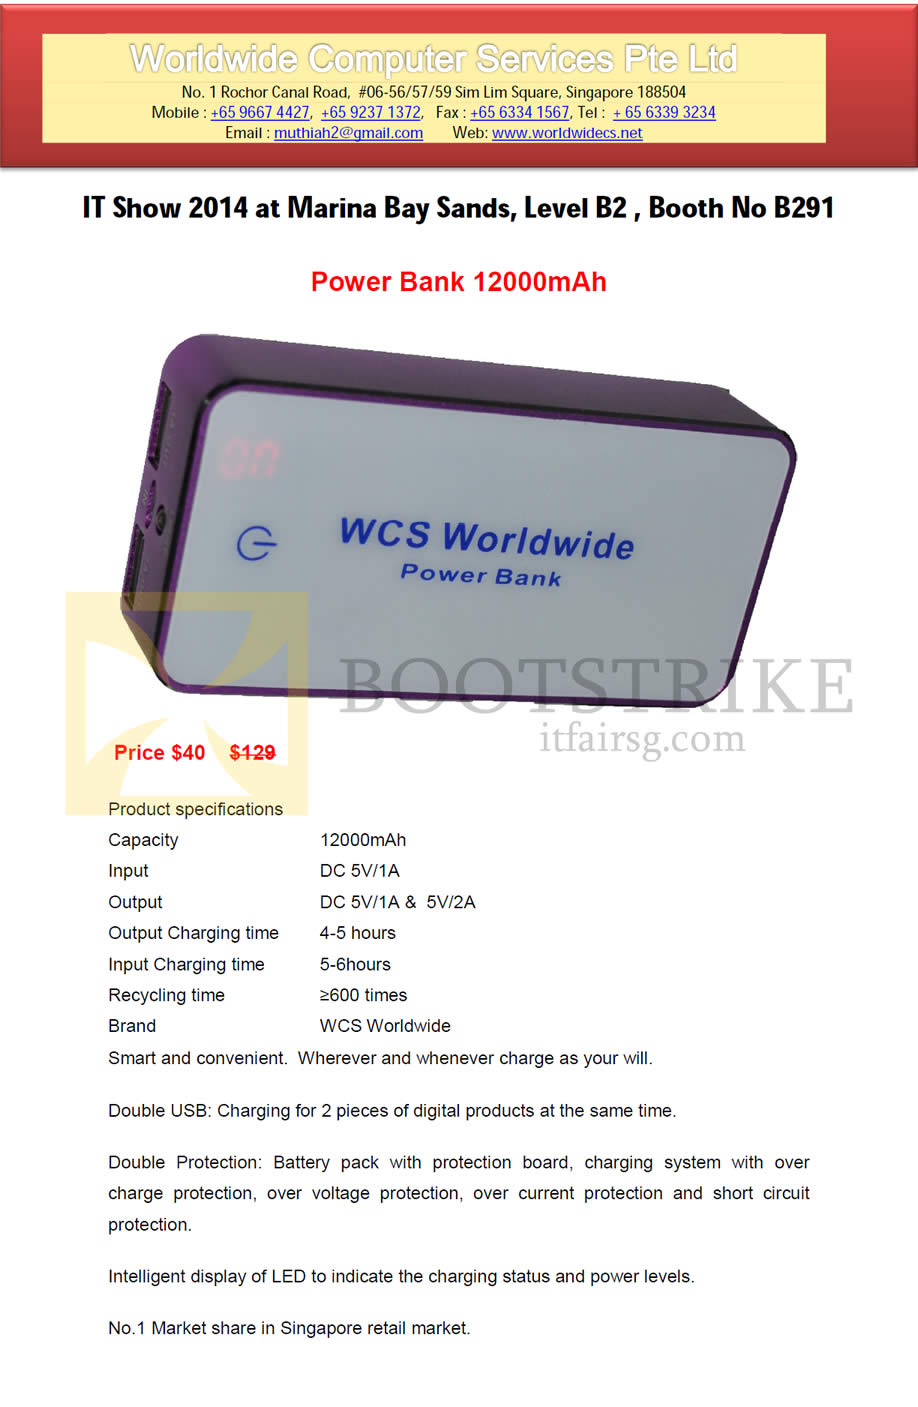 IT SHOW 2014 price list image brochure of Worldwide Computer Services Power Bank External Charger